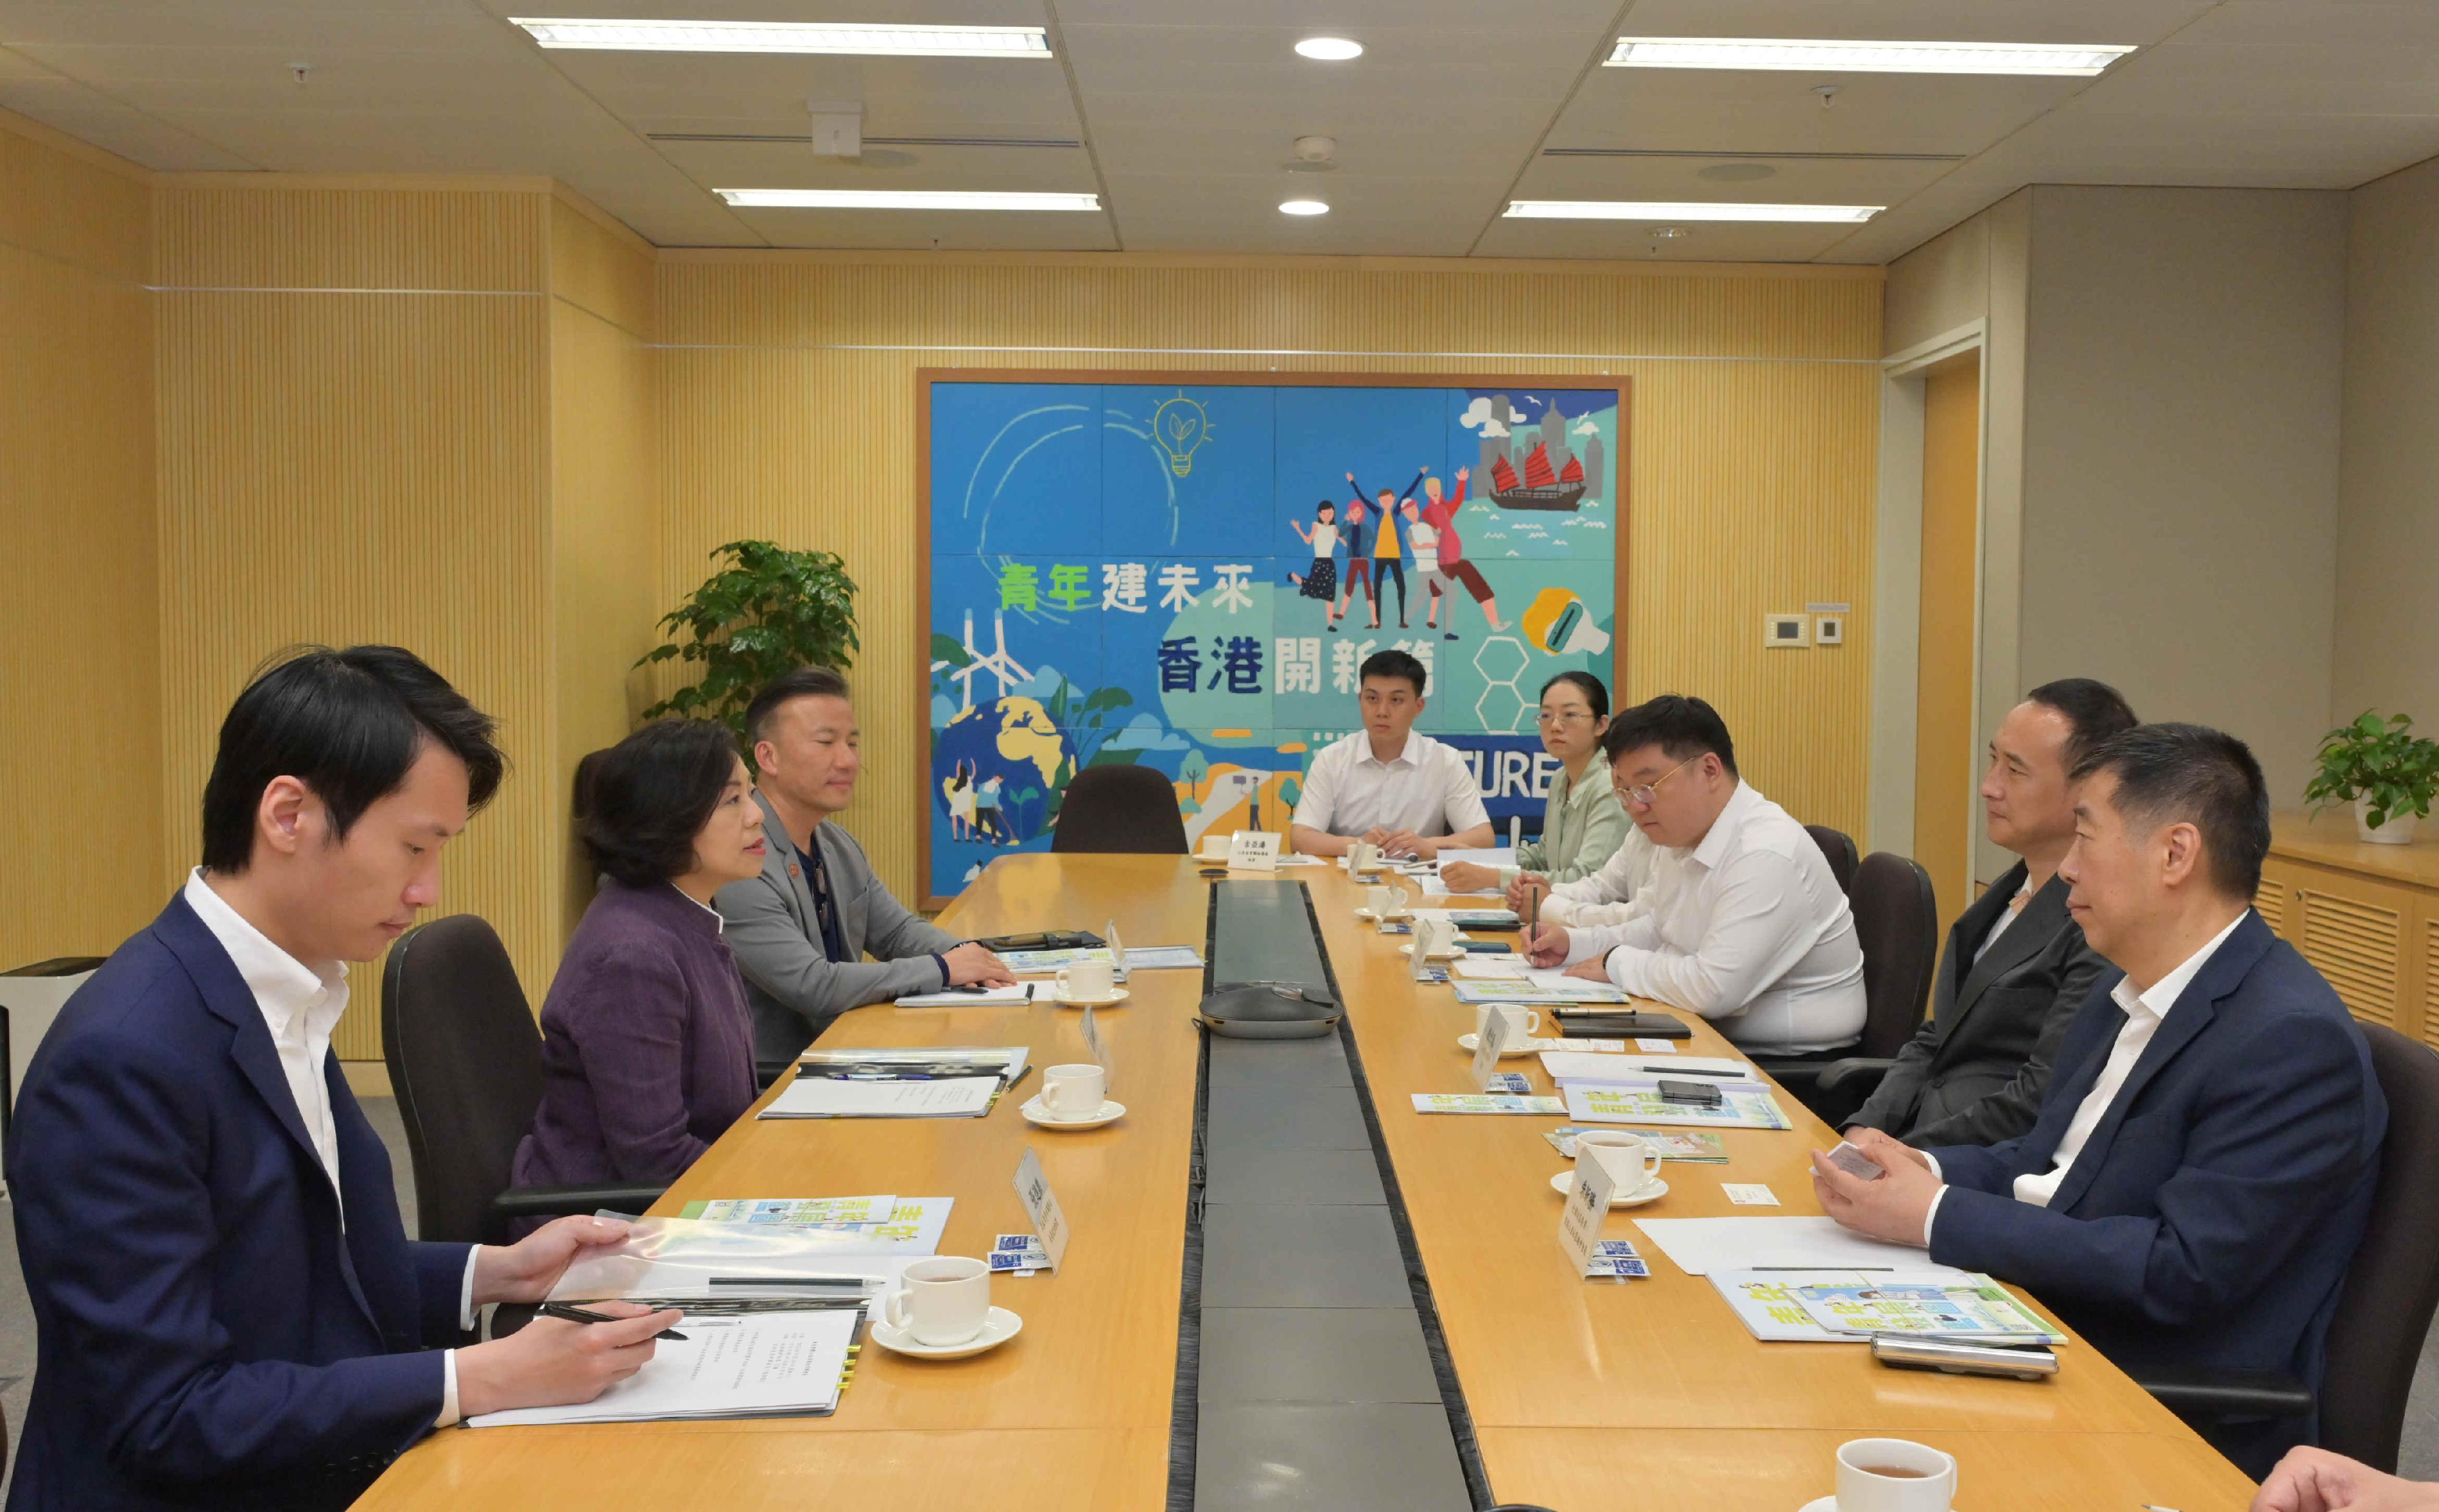 The Secretary for Home and Youth Affairs, Miss Alice Mak, today (May 29) met with a delegation led by the Secretary of the Shandong Provincial Committee of the Communist Youth League of China, Mr Yin Shiyi. Photo shows Miss Mak (second left), and the Commissioner for Youth, Mr Wallace Lau (third left), meeting with Mr Yin (second right) and members of the delegation to discuss items of mutual interest.